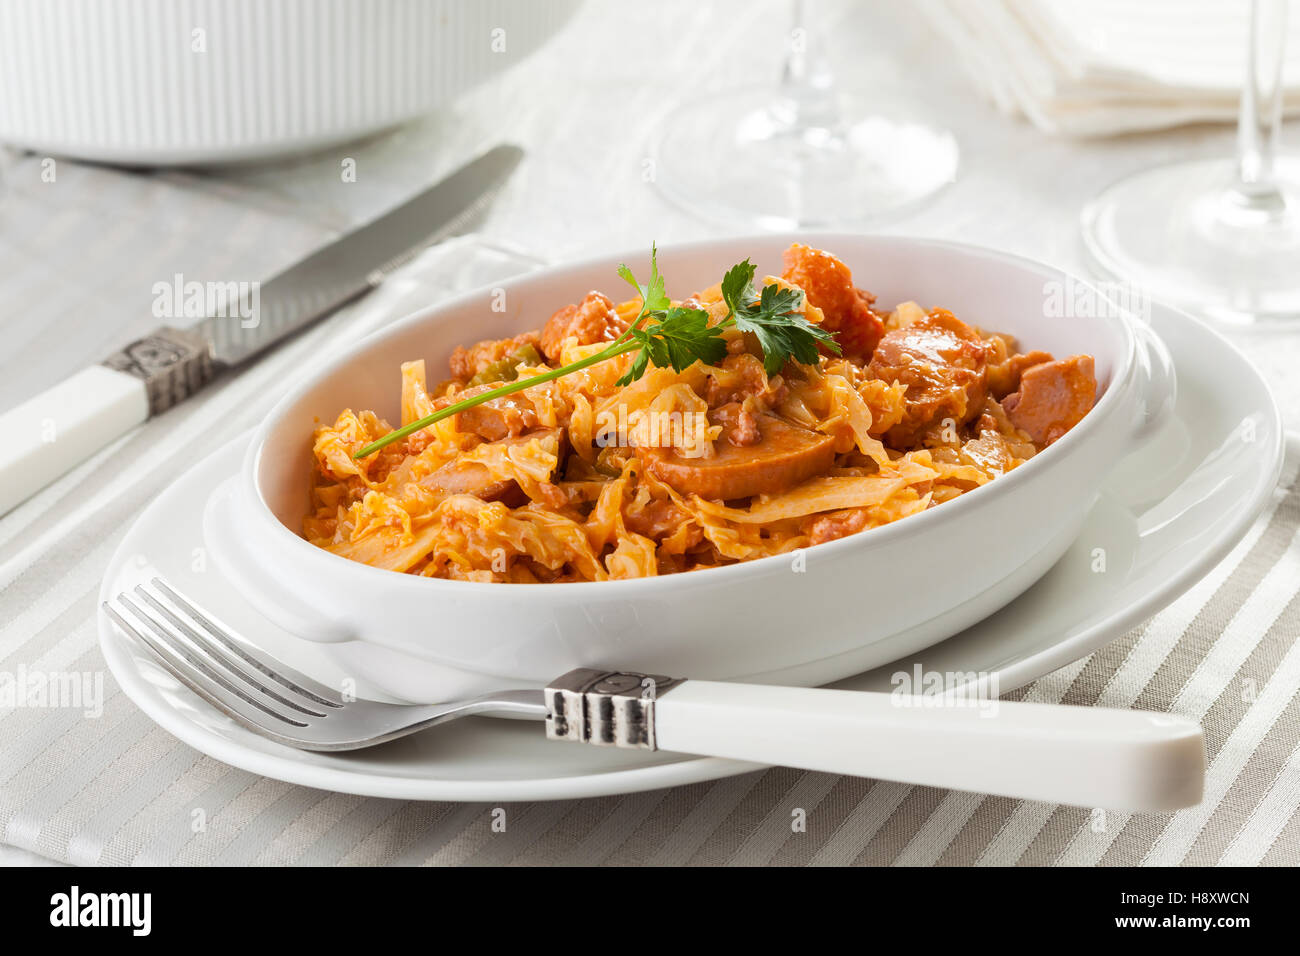 Meat goulash traditional food, typical for Transylvania. Stock Photo